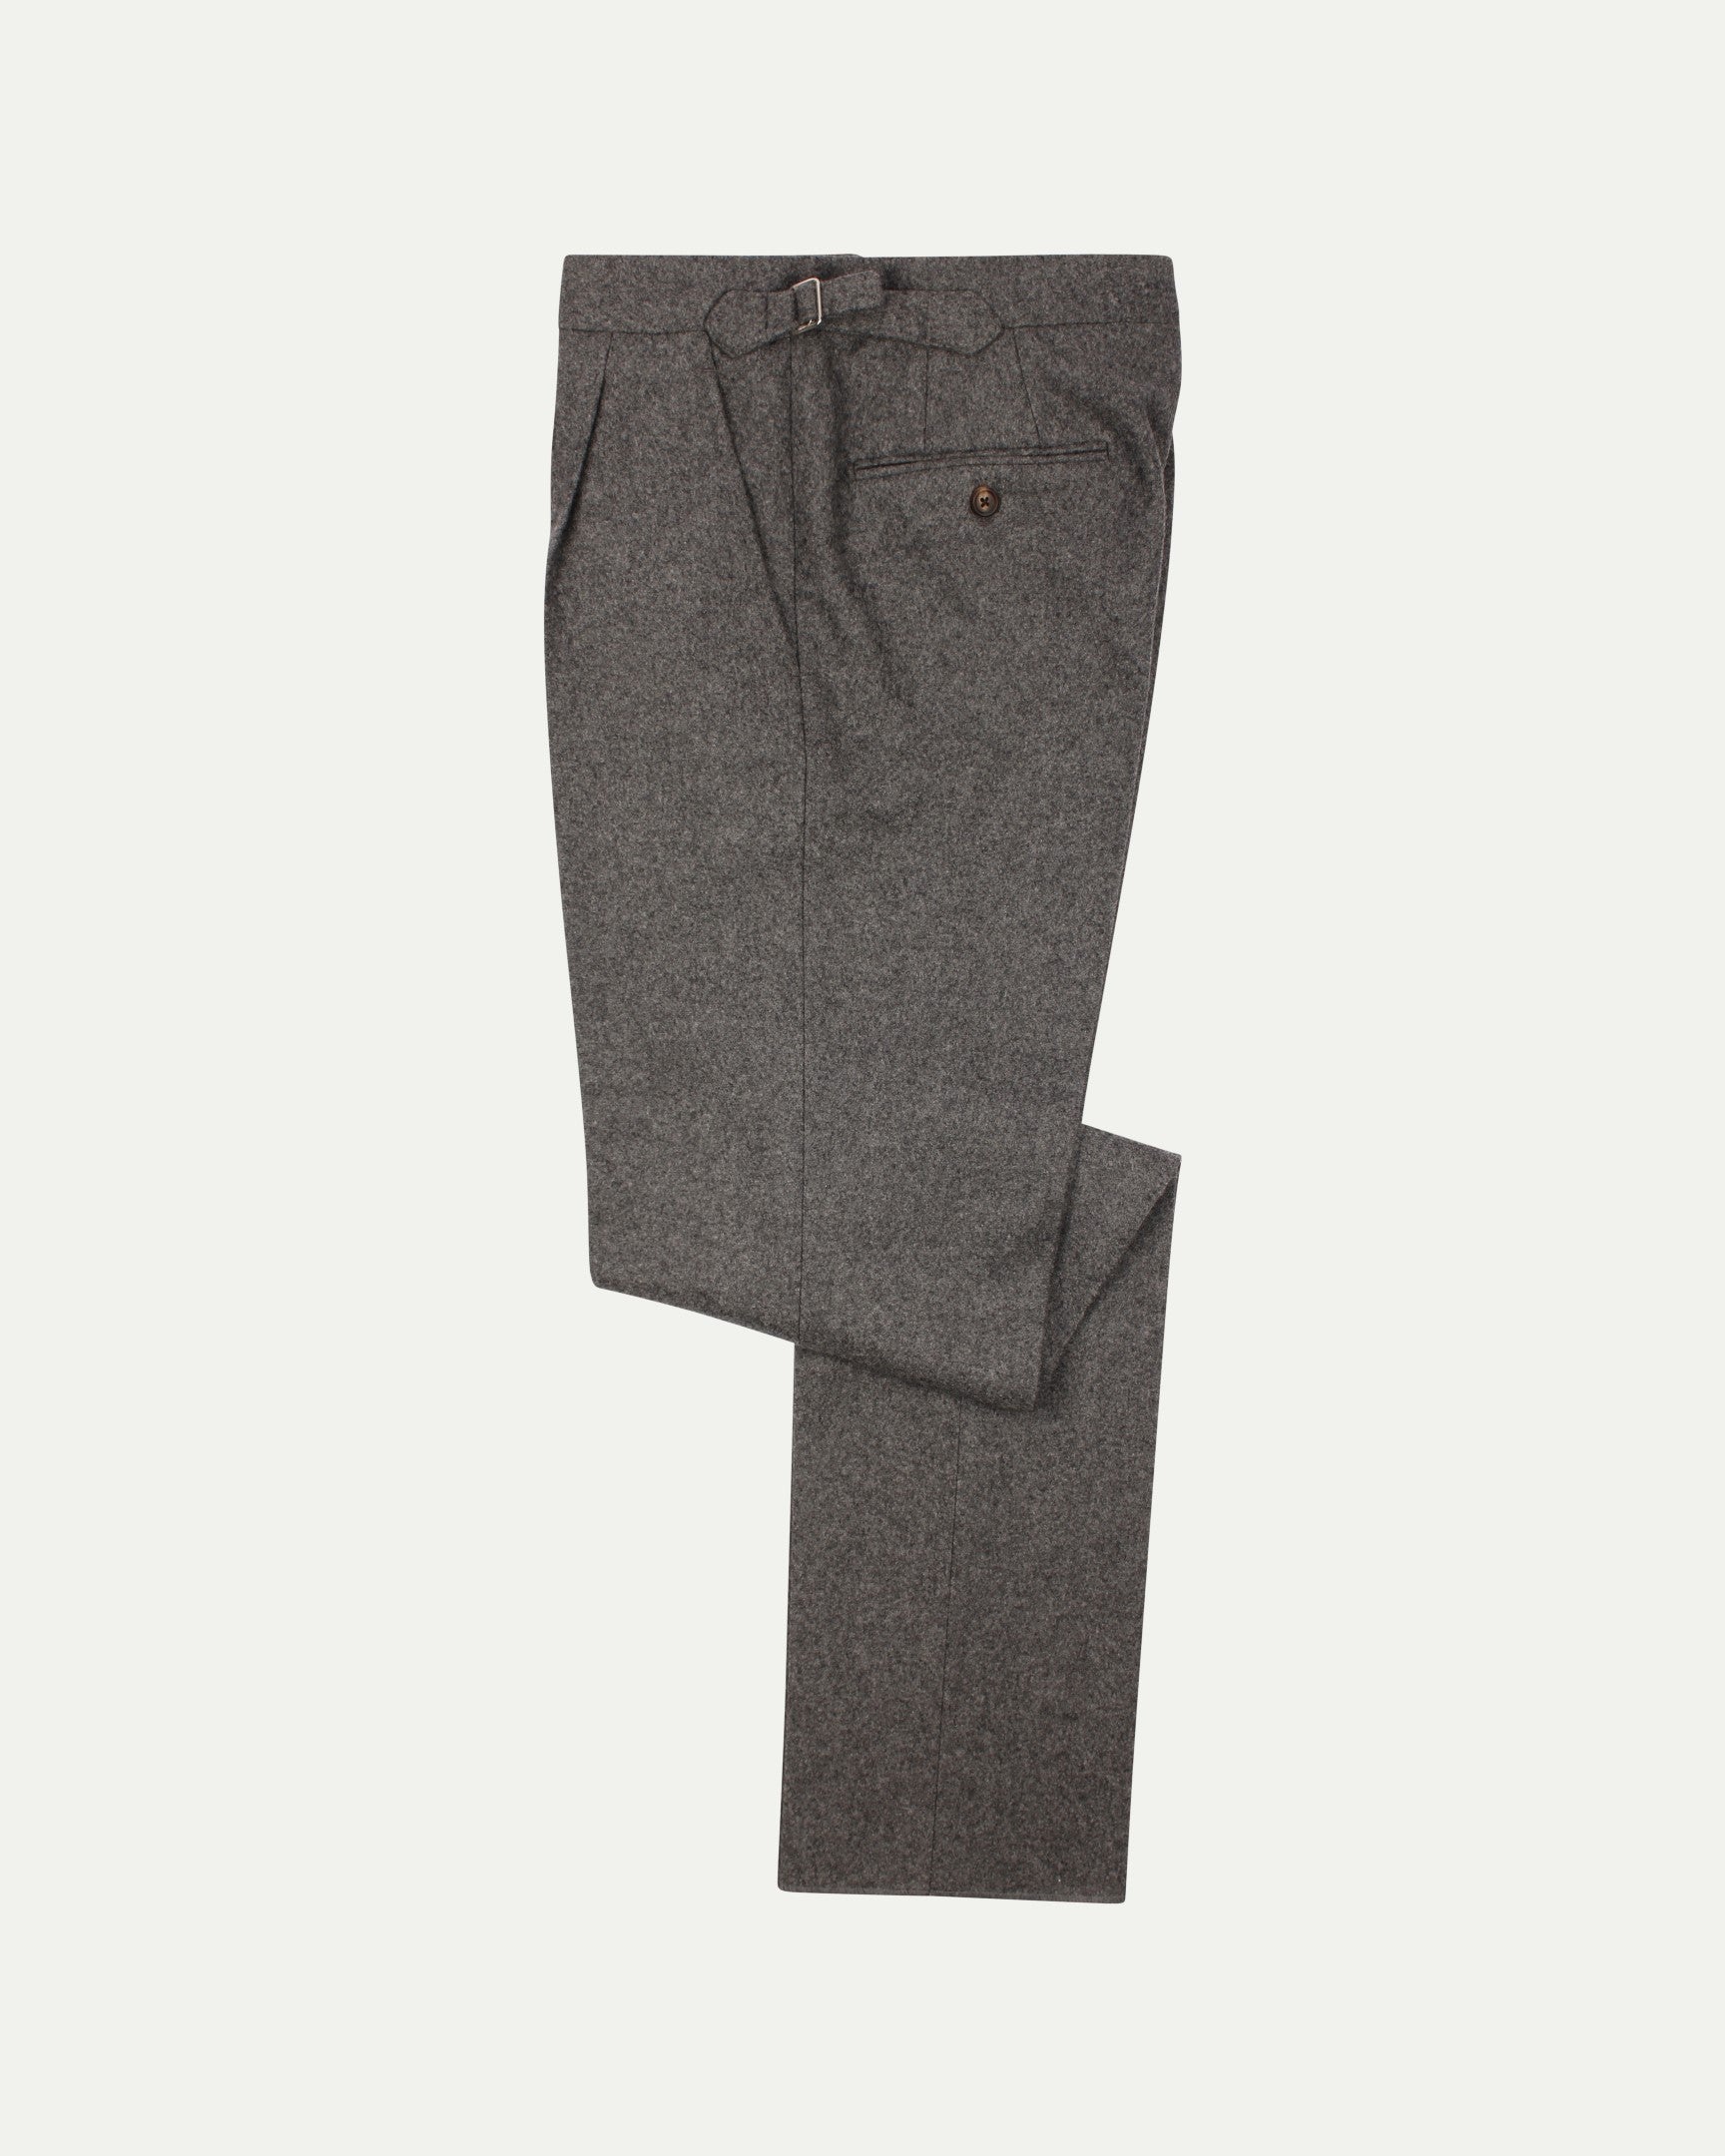 Made-To-Order Trousers in Mid Grey Flannel